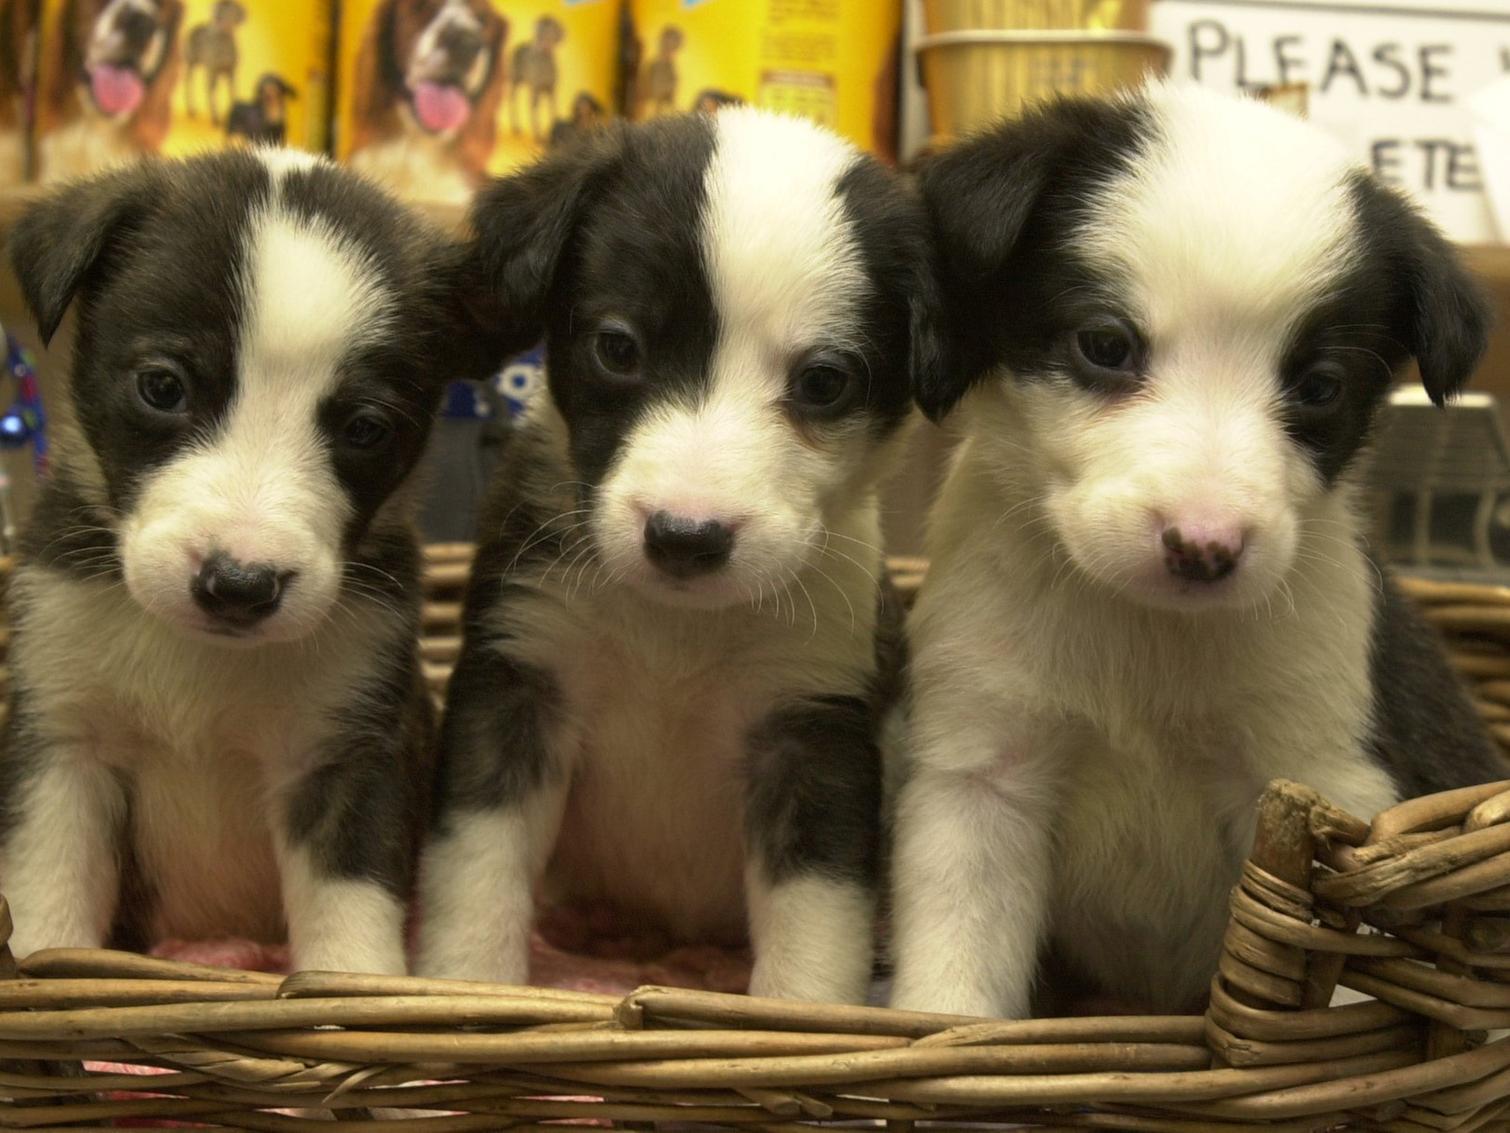 Three puppies from a litter of 10 at the RSPCA in Leeds who were unwanted at Christmas.